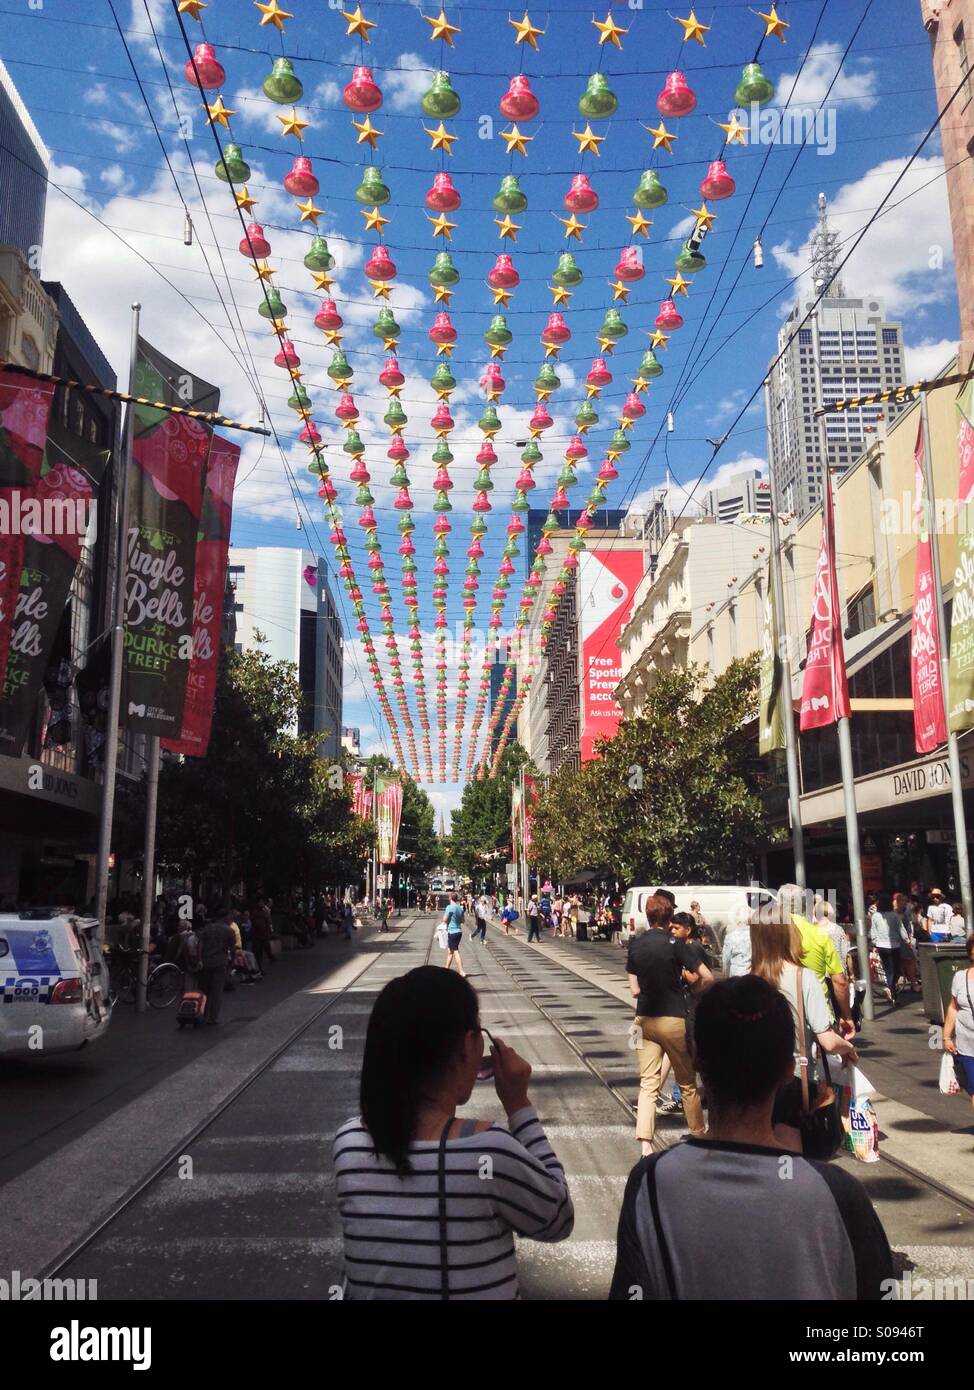 Christmas decorations in the Bourke Street Mall in Melbourne, Victoria